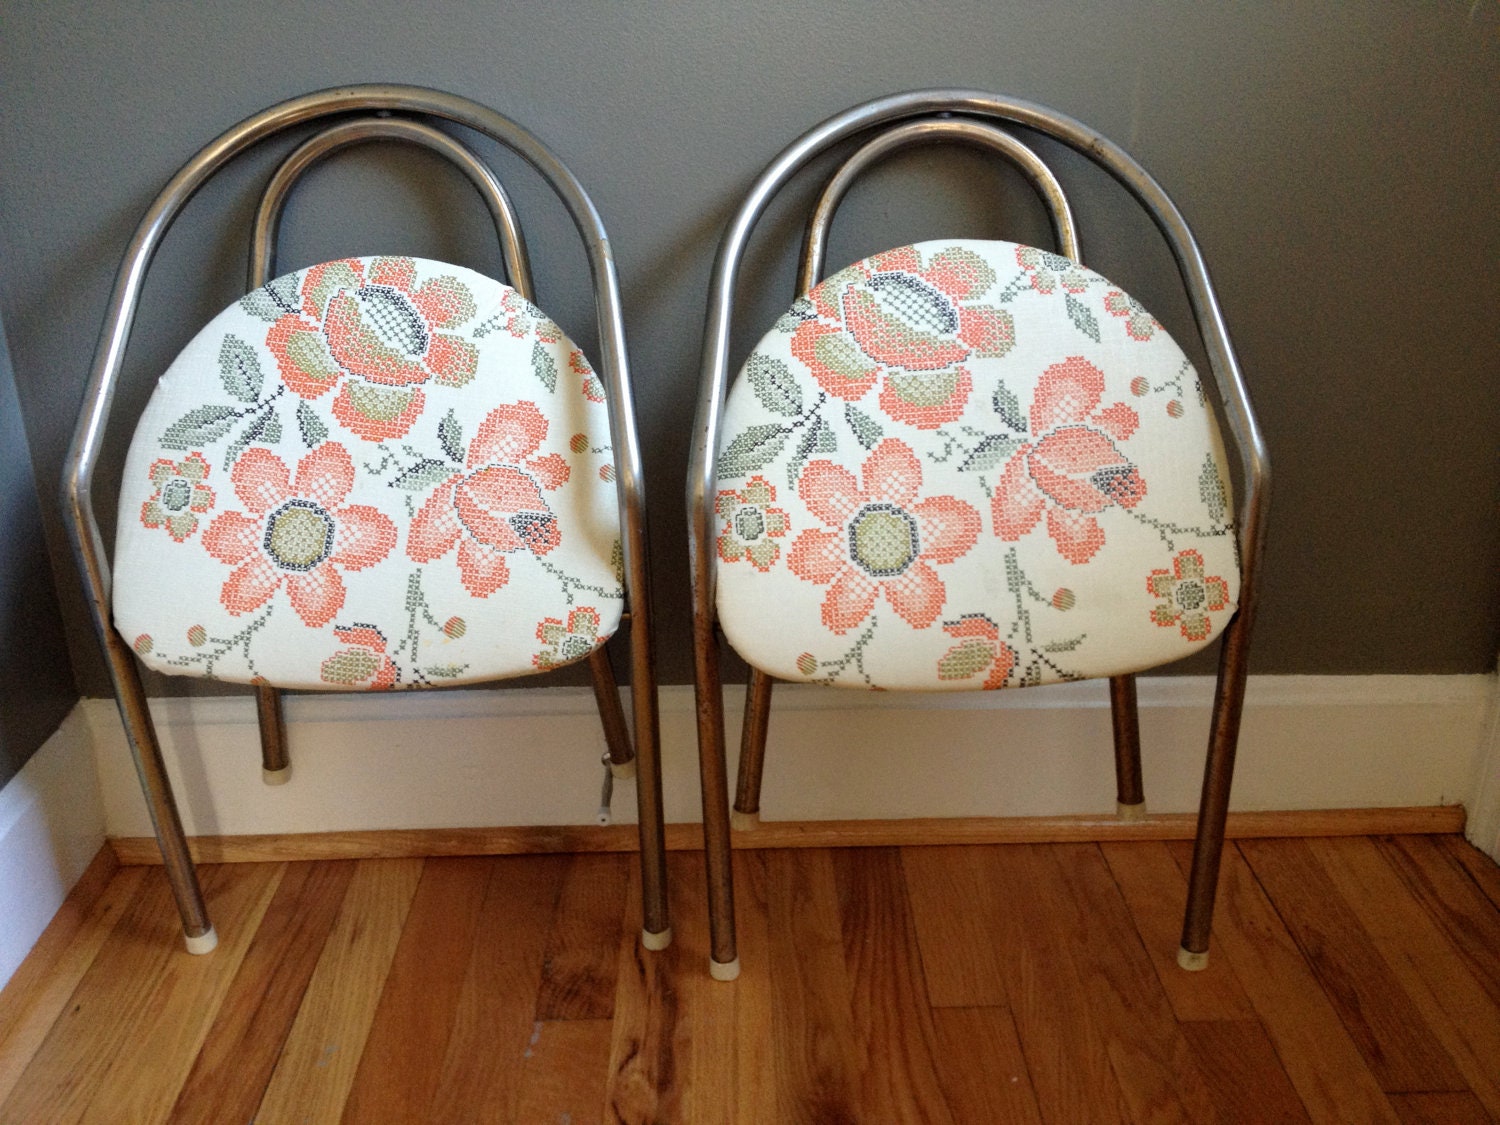 Set of 2 Upcycled Vintage Children's Metal Folding Chairs